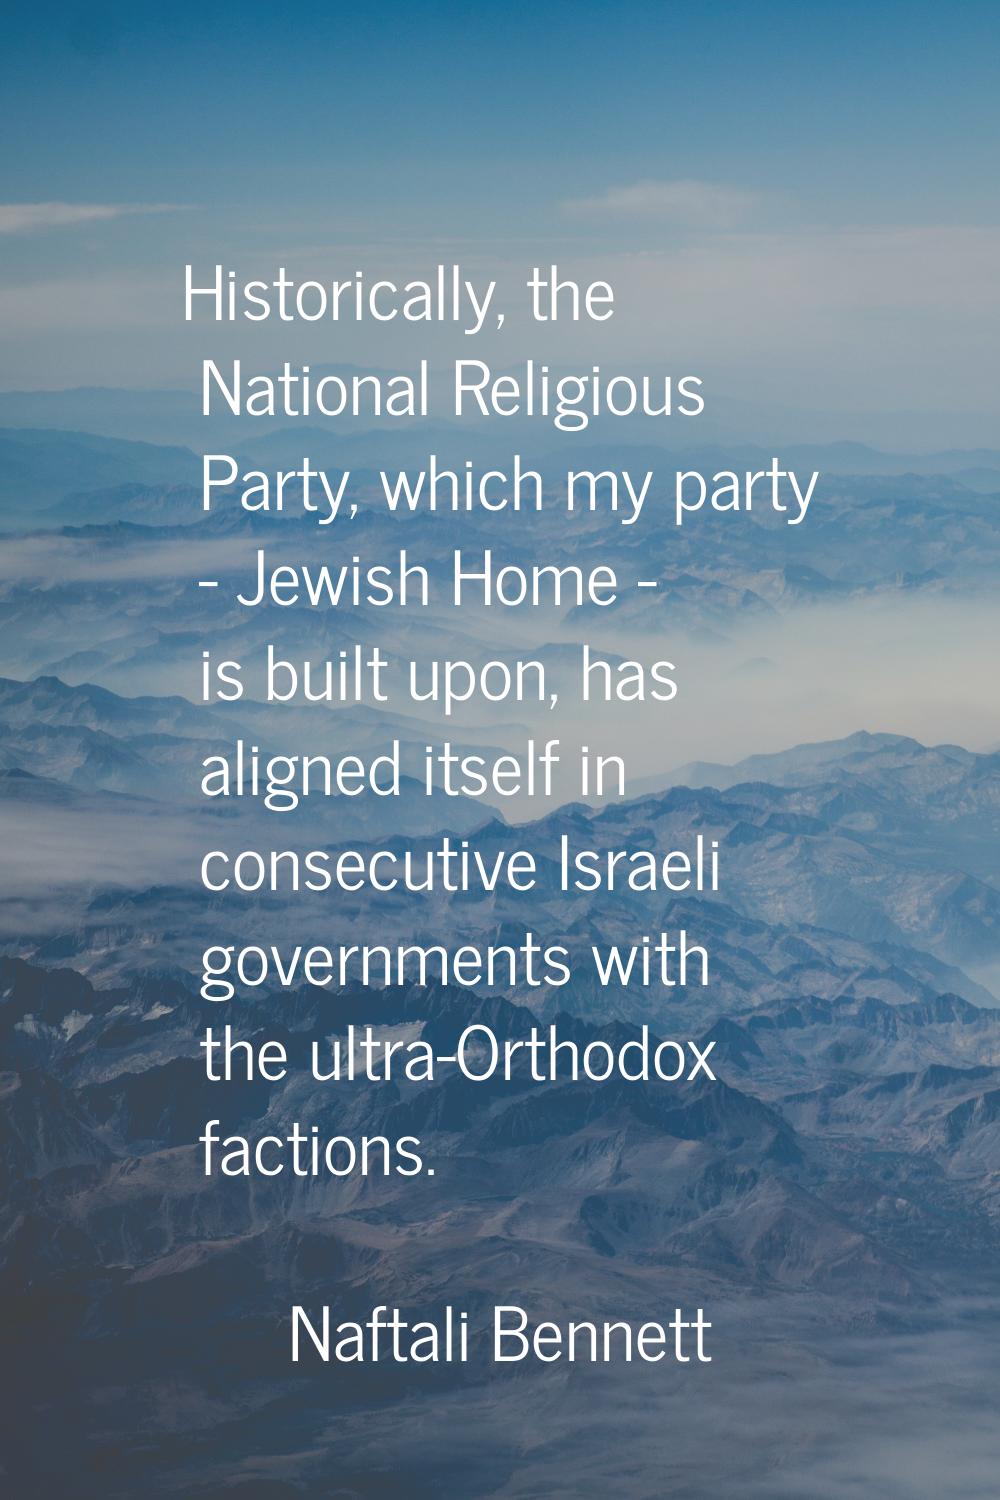 Historically, the National Religious Party, which my party - Jewish Home - is built upon, has align